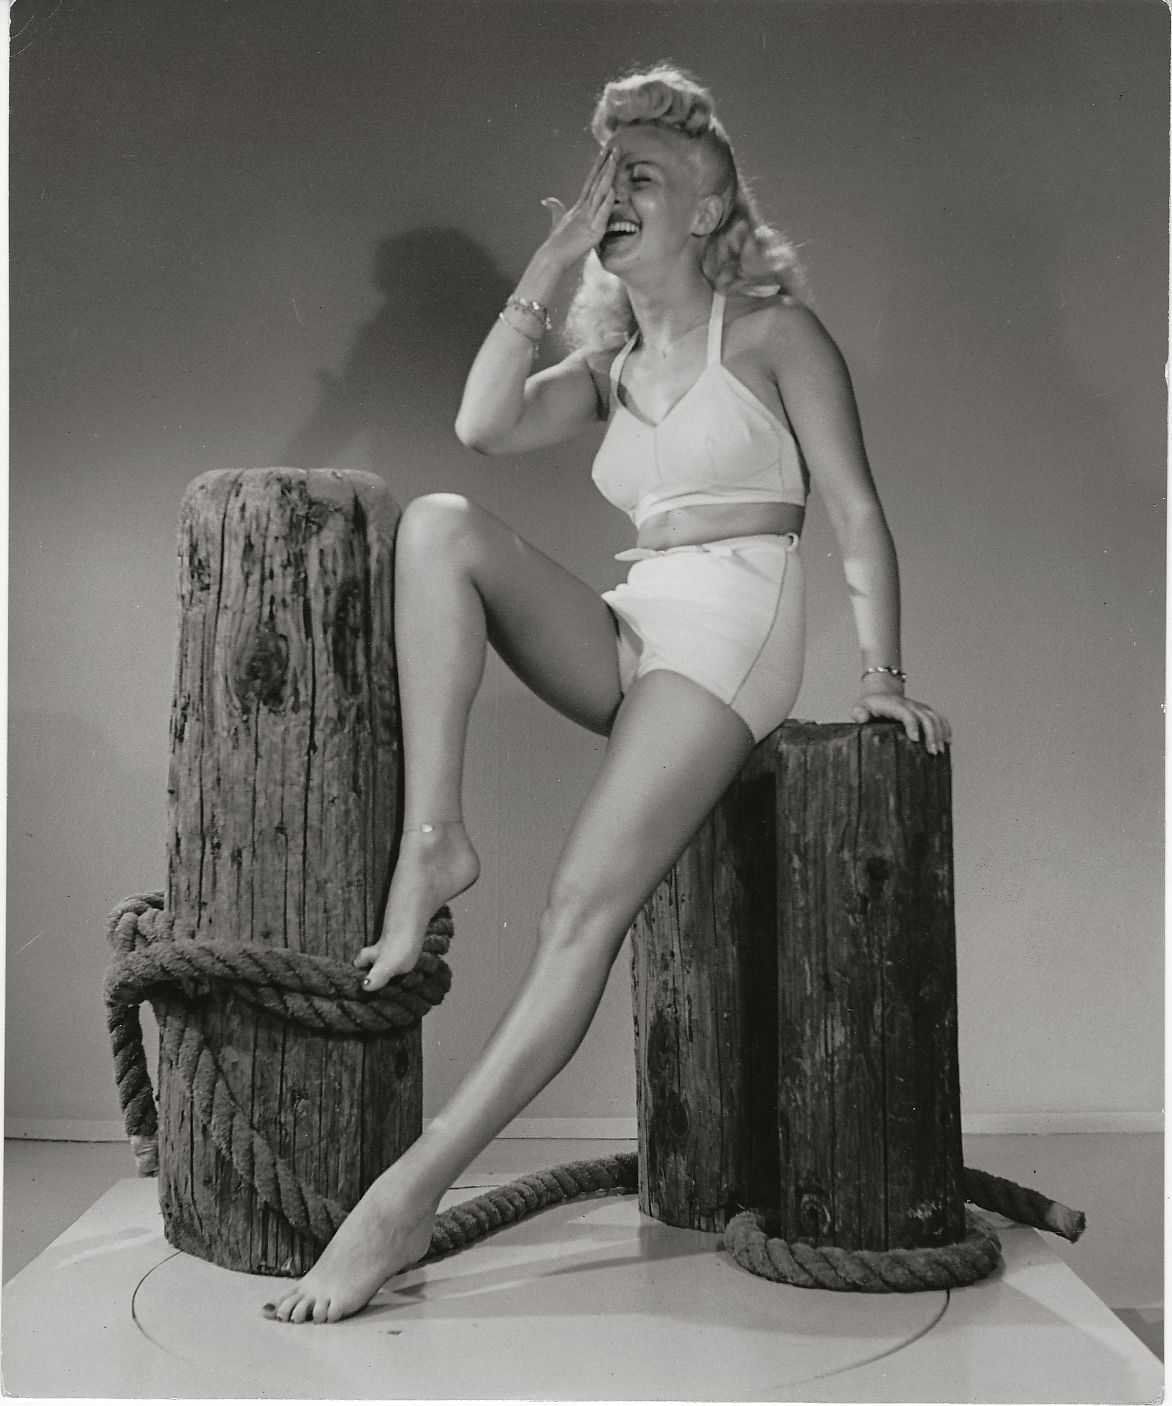 51 Hottest Betty Grable Bikini pictures Are An Embodiment Of Greatness 105